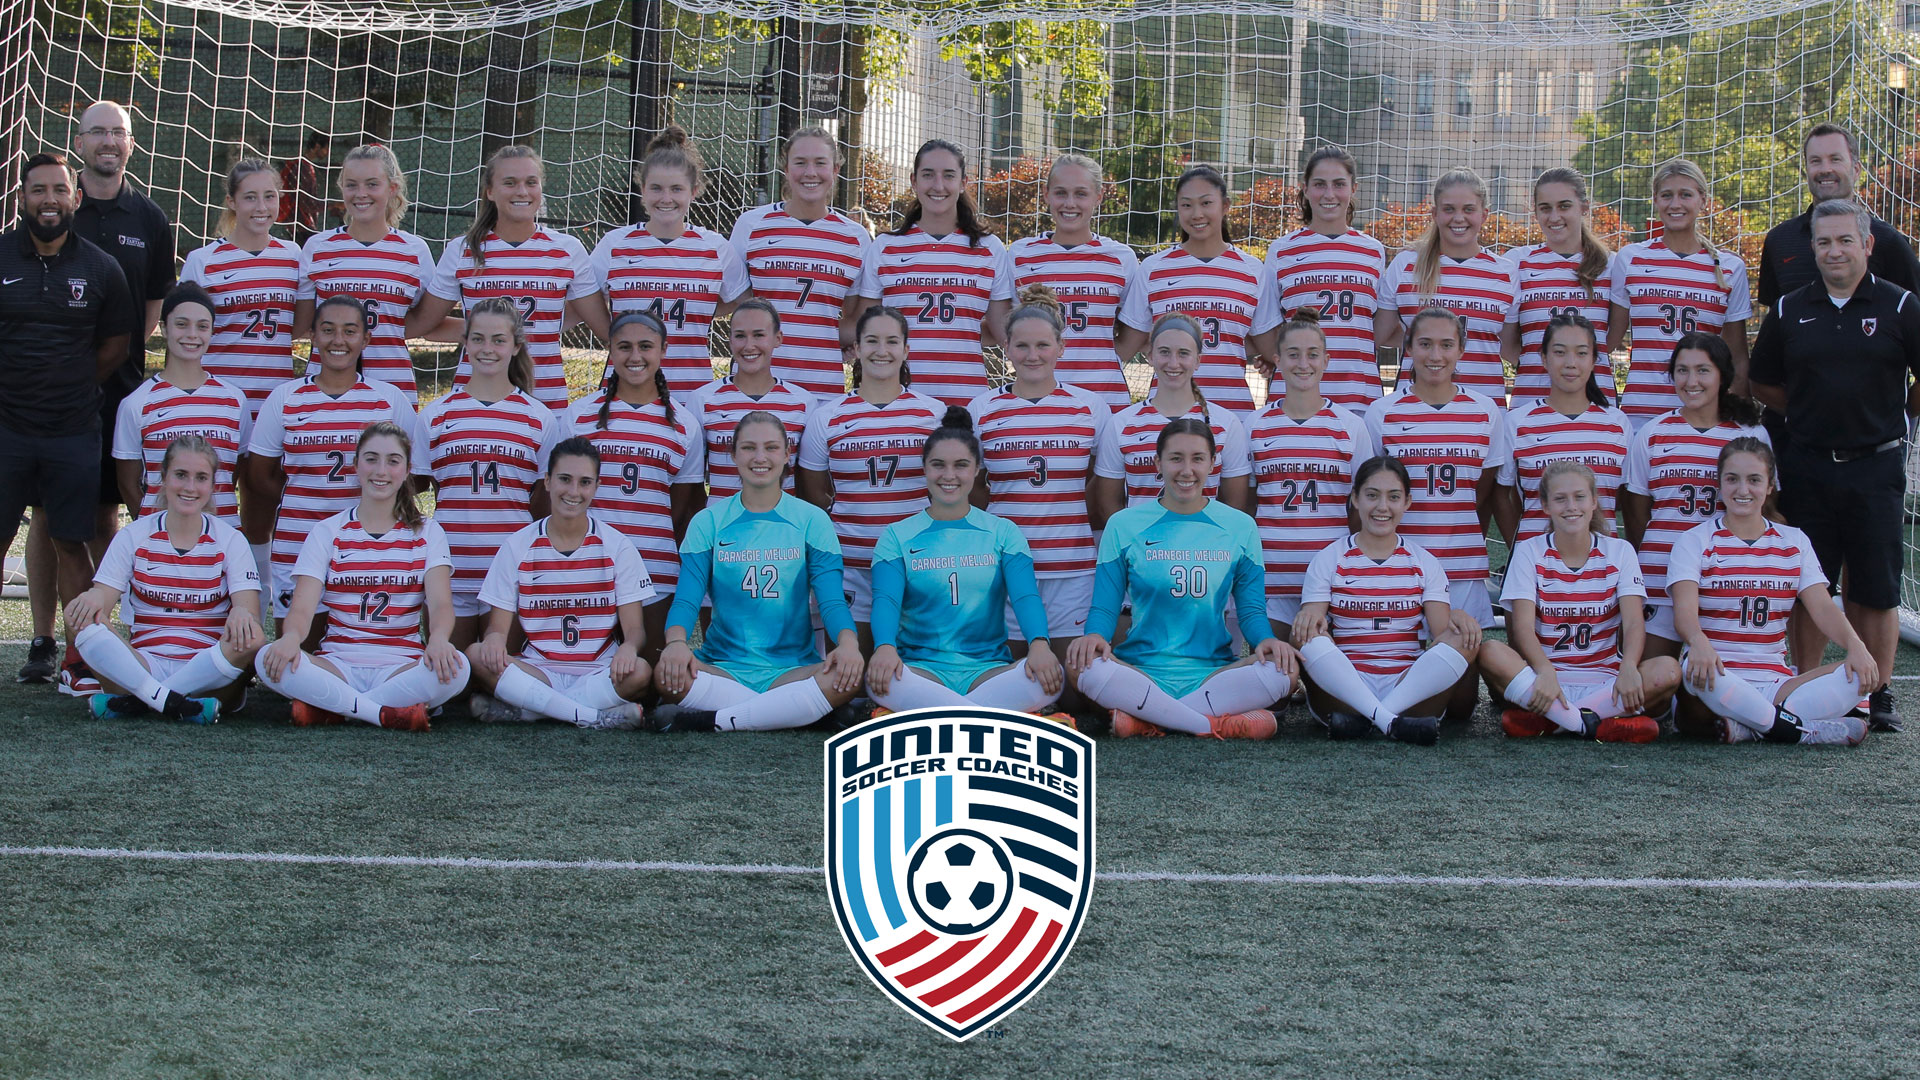 team photo of women's soccer team in three rows with United Soccer Coaches Logo